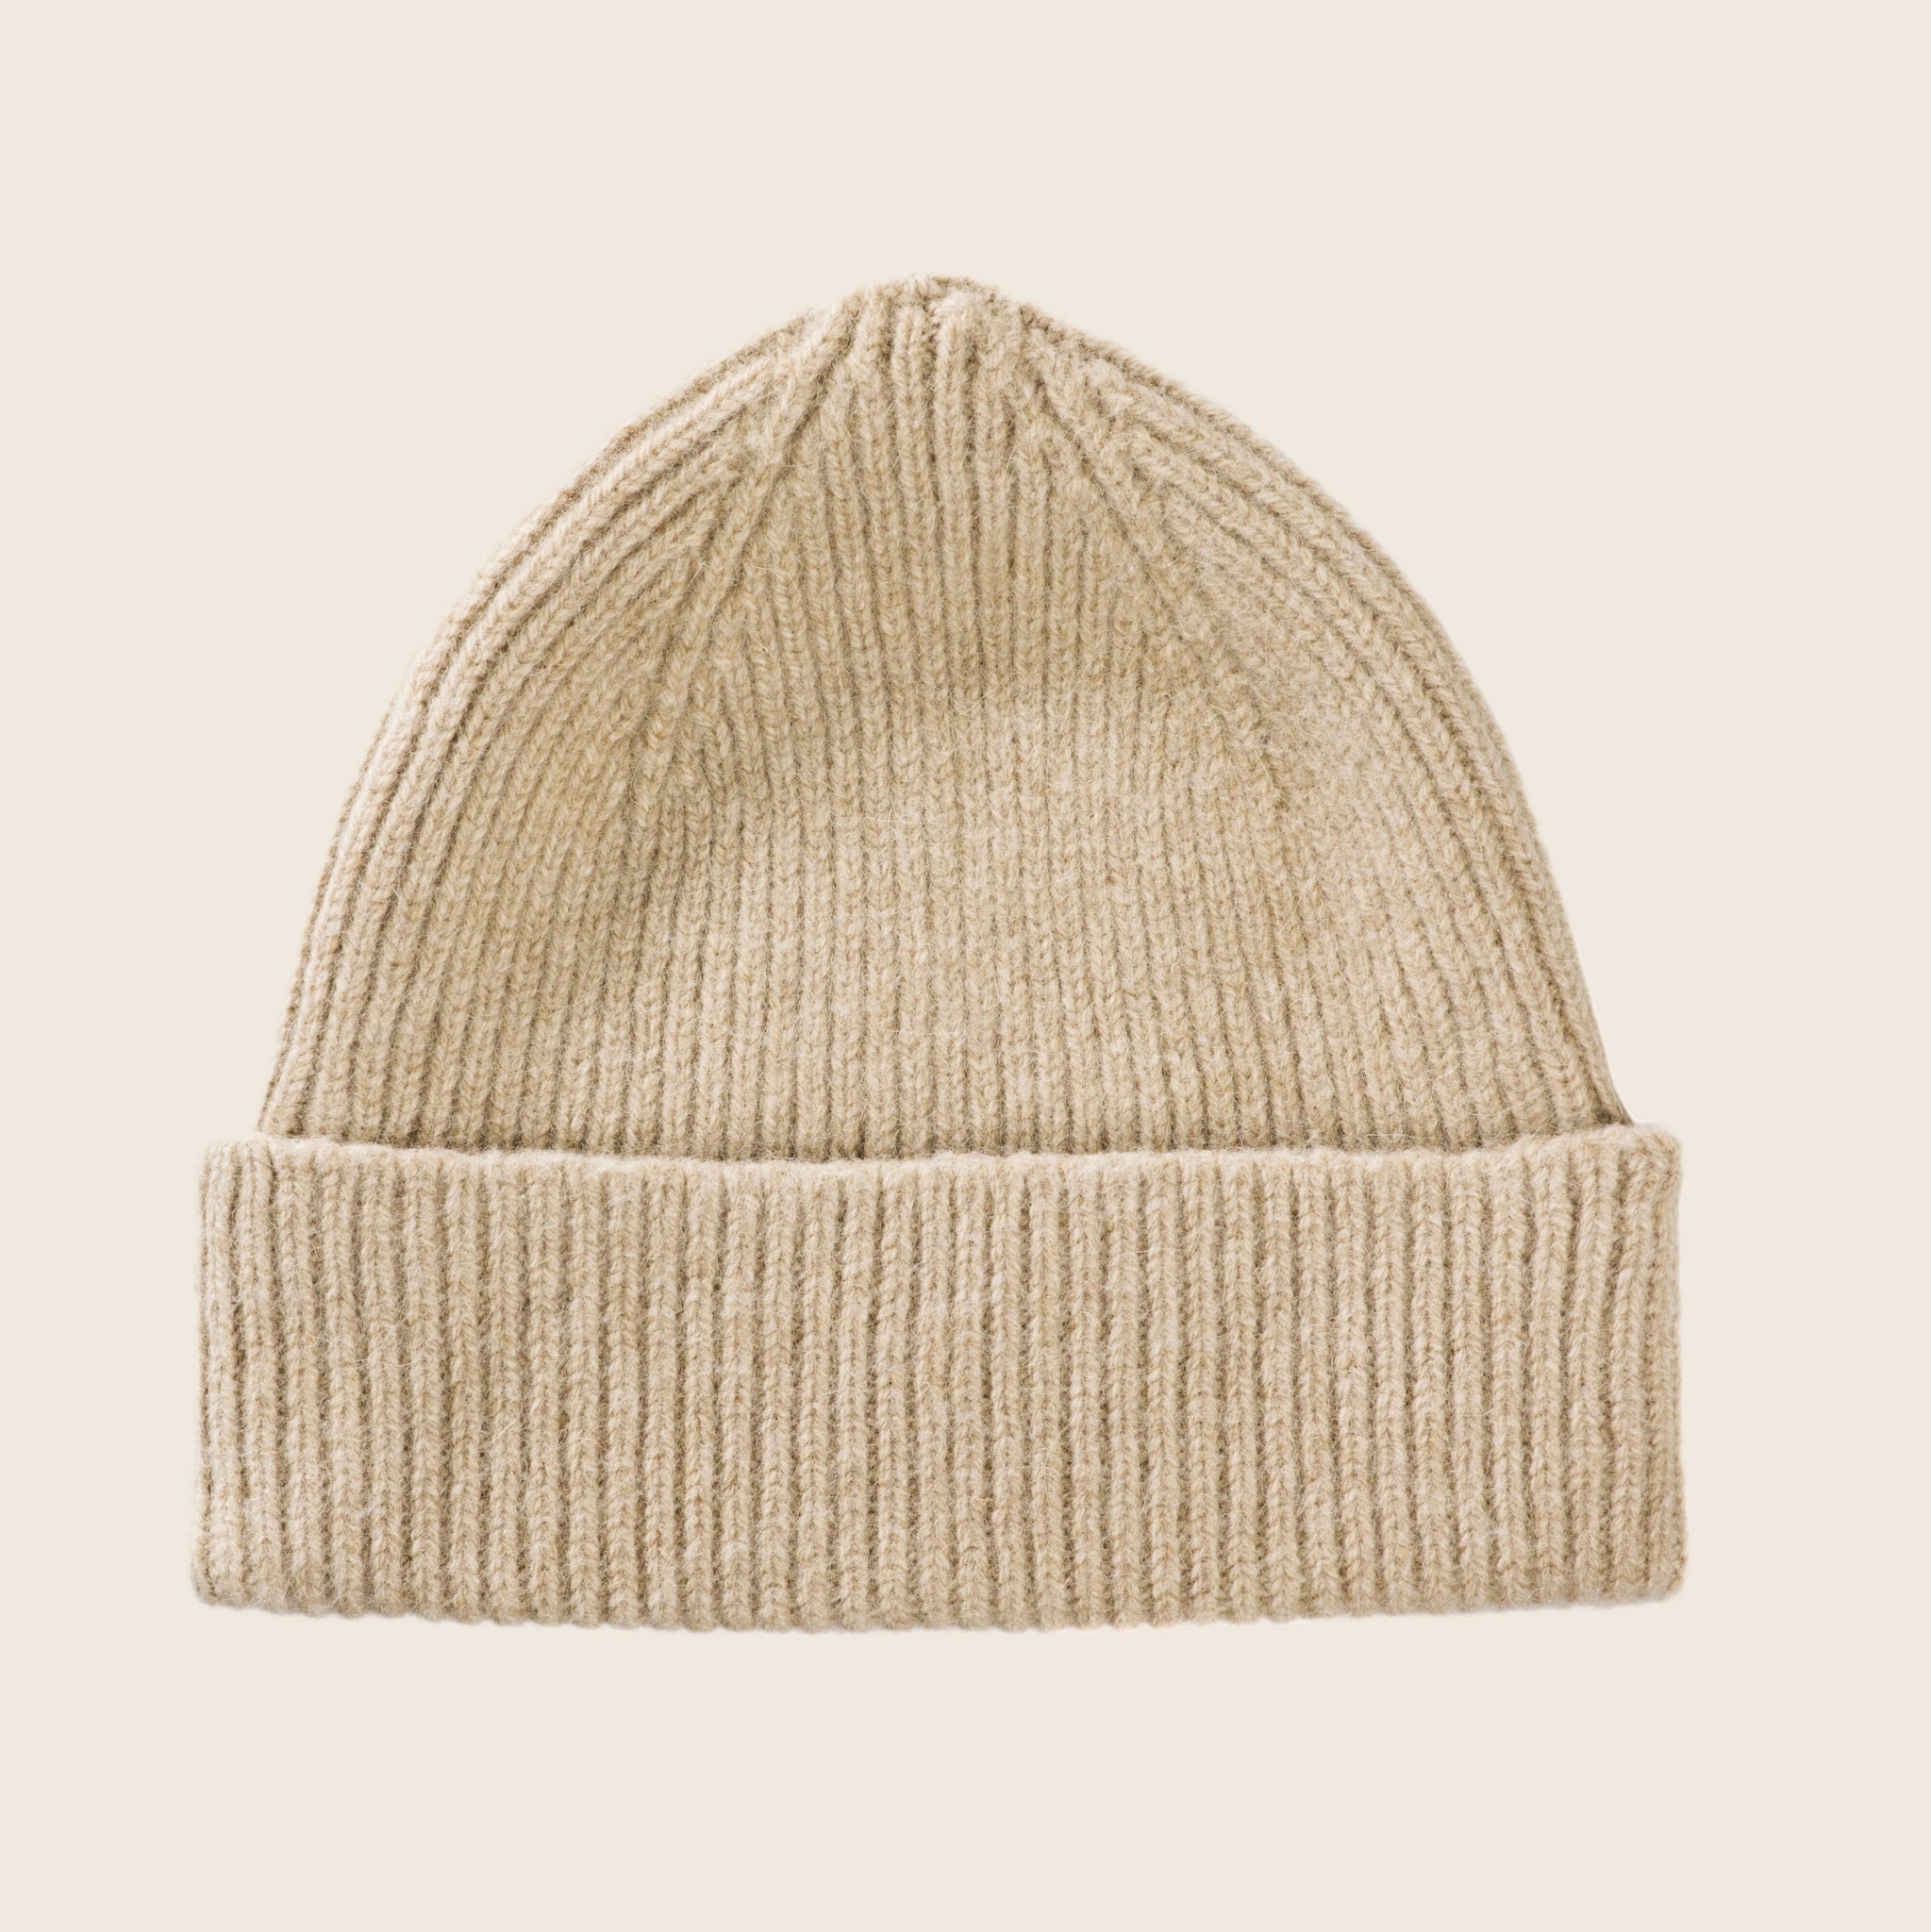 BEANIE IN SAND BY LE BONNET